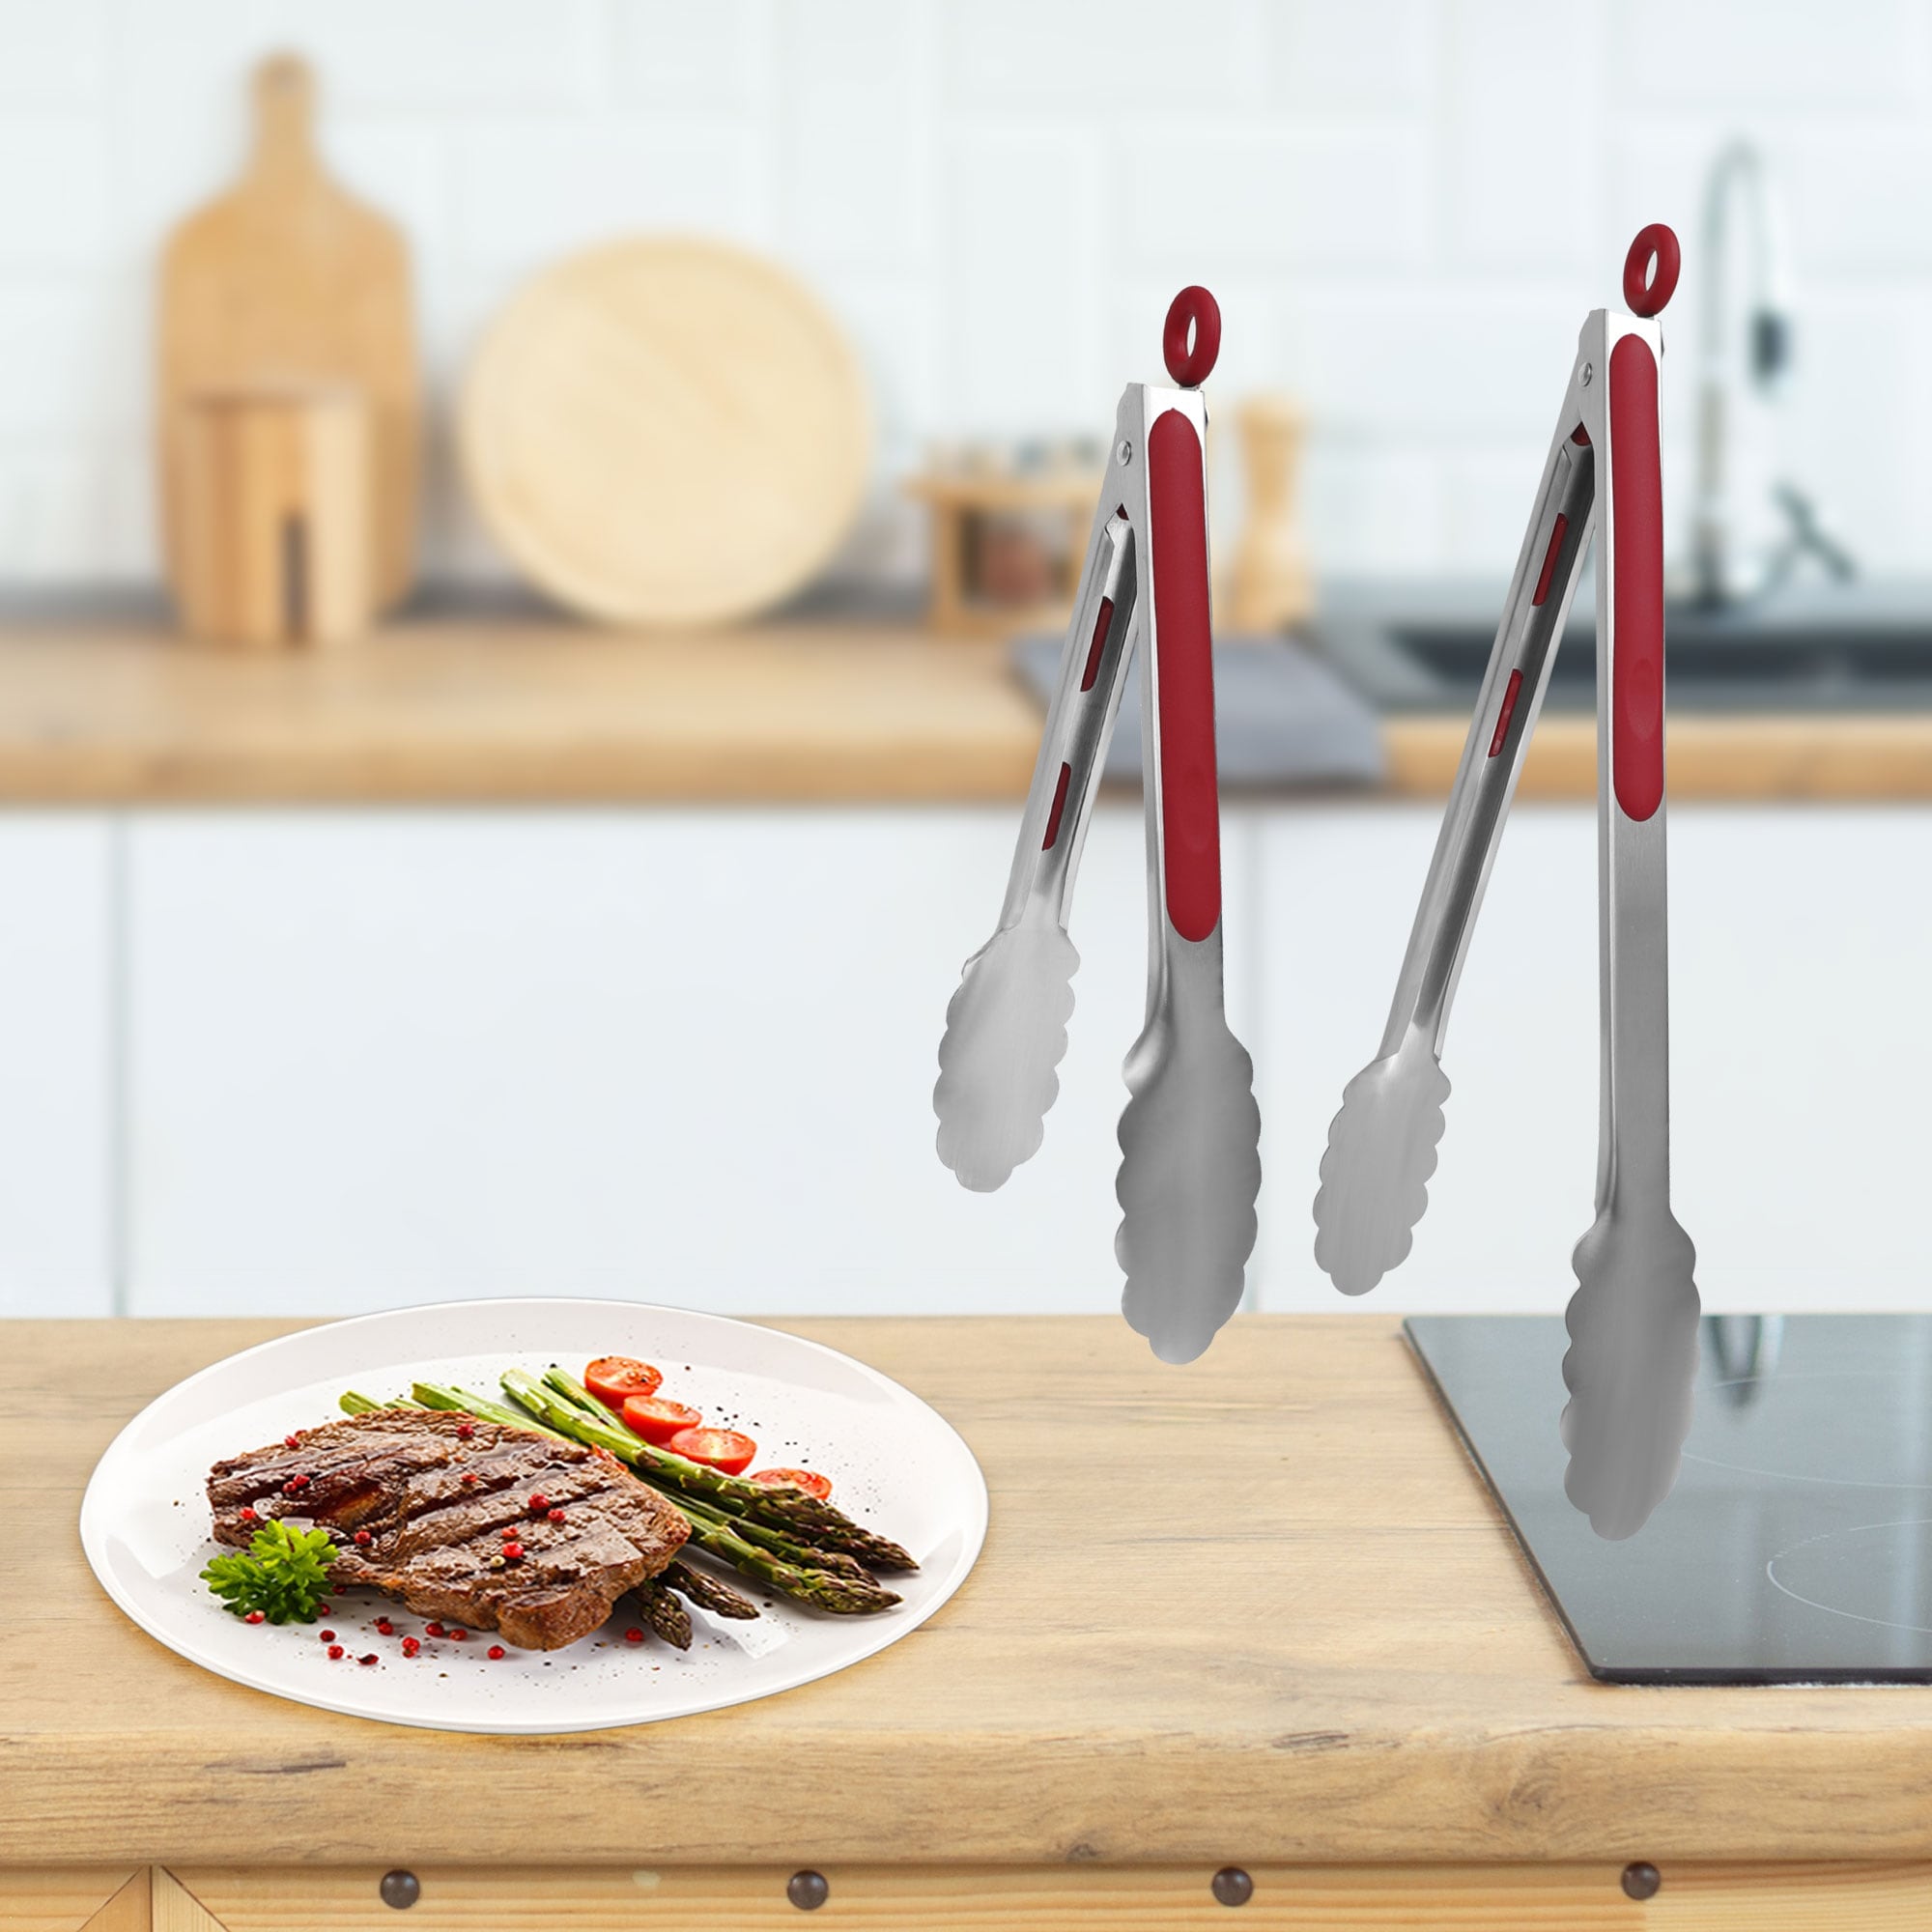 https://ak1.ostkcdn.com/images/products/is/images/direct/a8404b423450ac843d7f2483feba1087f3a13f9d/Kitchen-Tong-Set-for-Cooking-Stainless-Steel-Tongs-Silicone-Grip-Grill-2Pcs.jpg